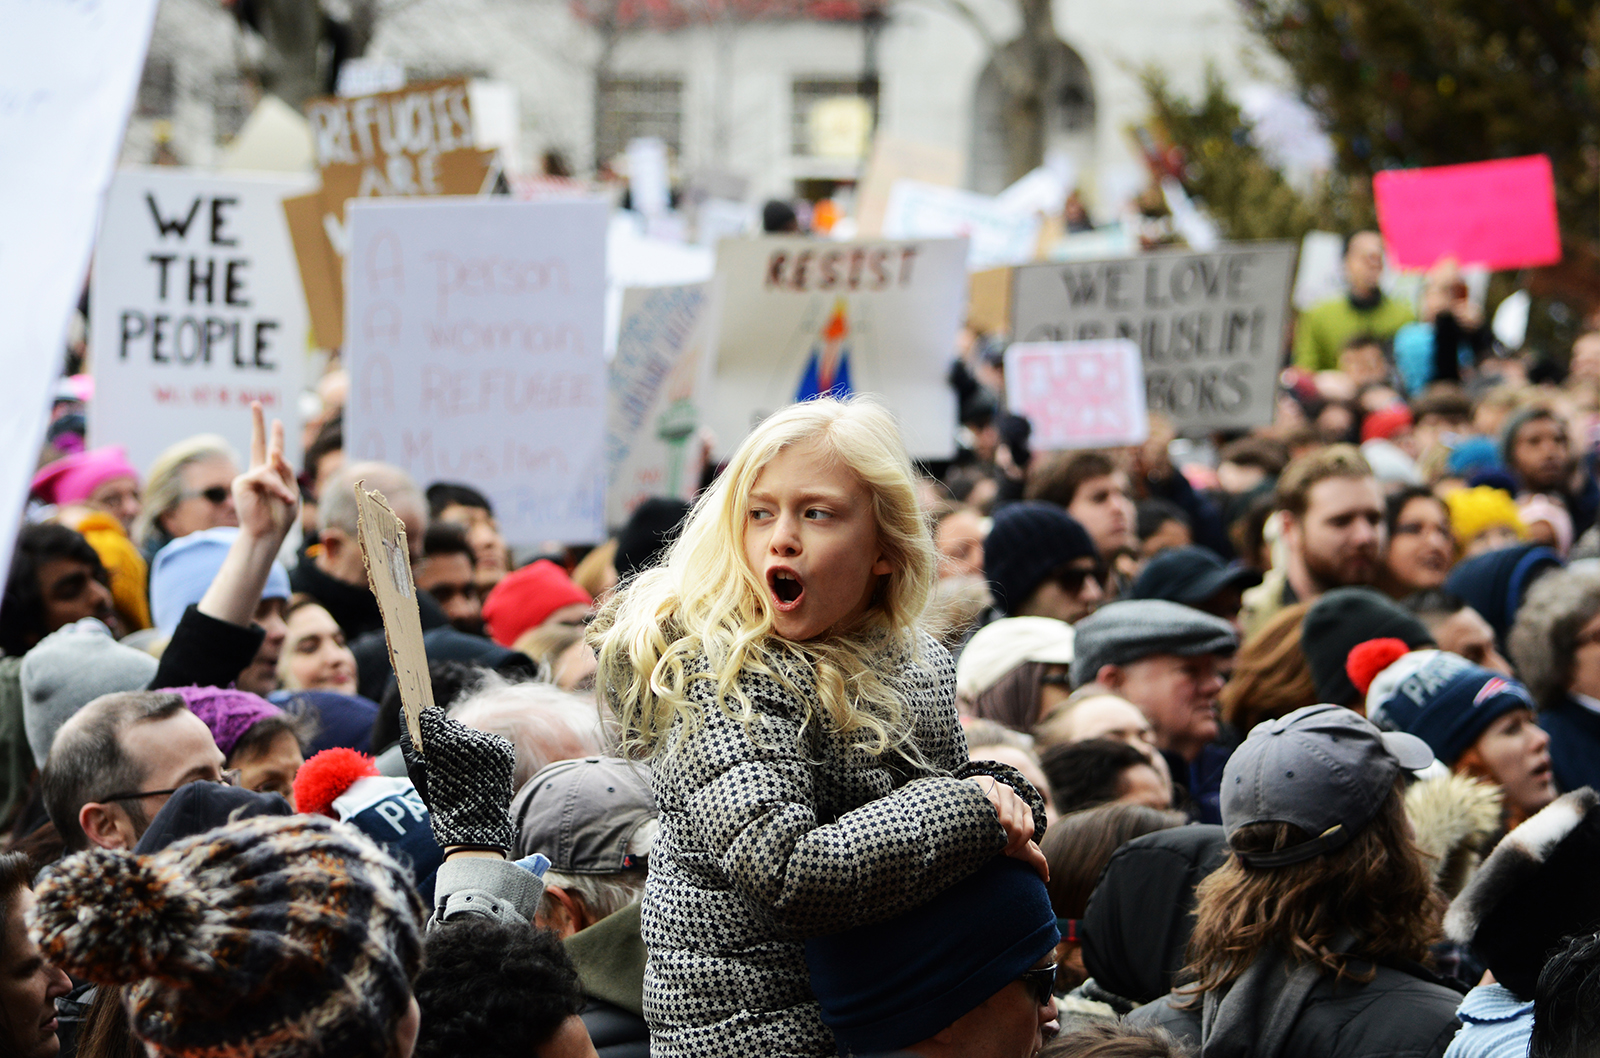 A young girl chants on her father's shoulders at the Protest Against Muslim Ban and Anti-Immigration Orders Sunday afternoon in Copley Square. PHOTO BY VIGUNTHAAN THARMARAJAH/ DAILY FREE PRESS STAFF